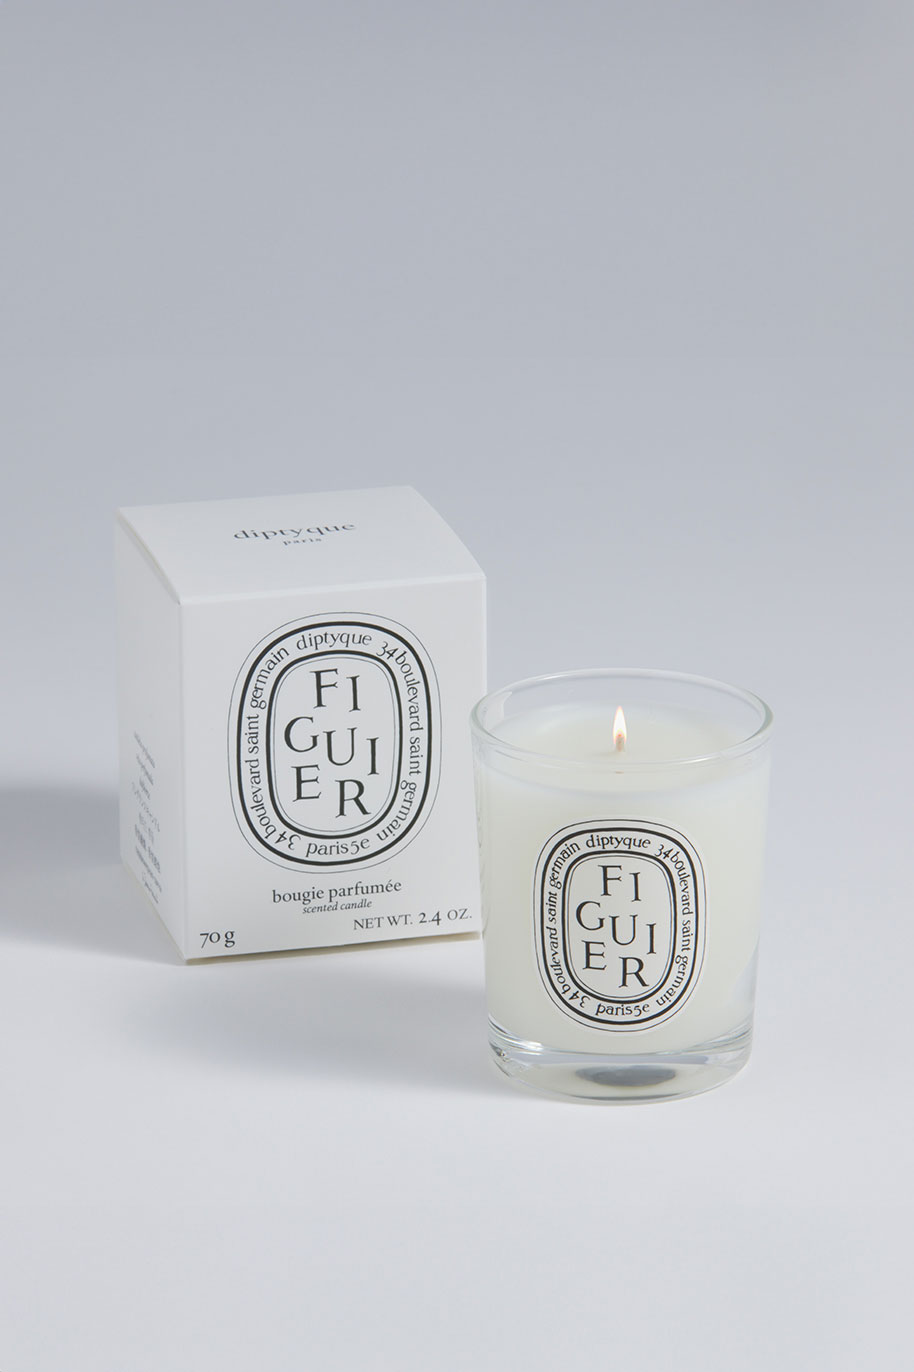 Diptyque for The Ritz-Carlton Figuier/Fig Tree Glass Candle